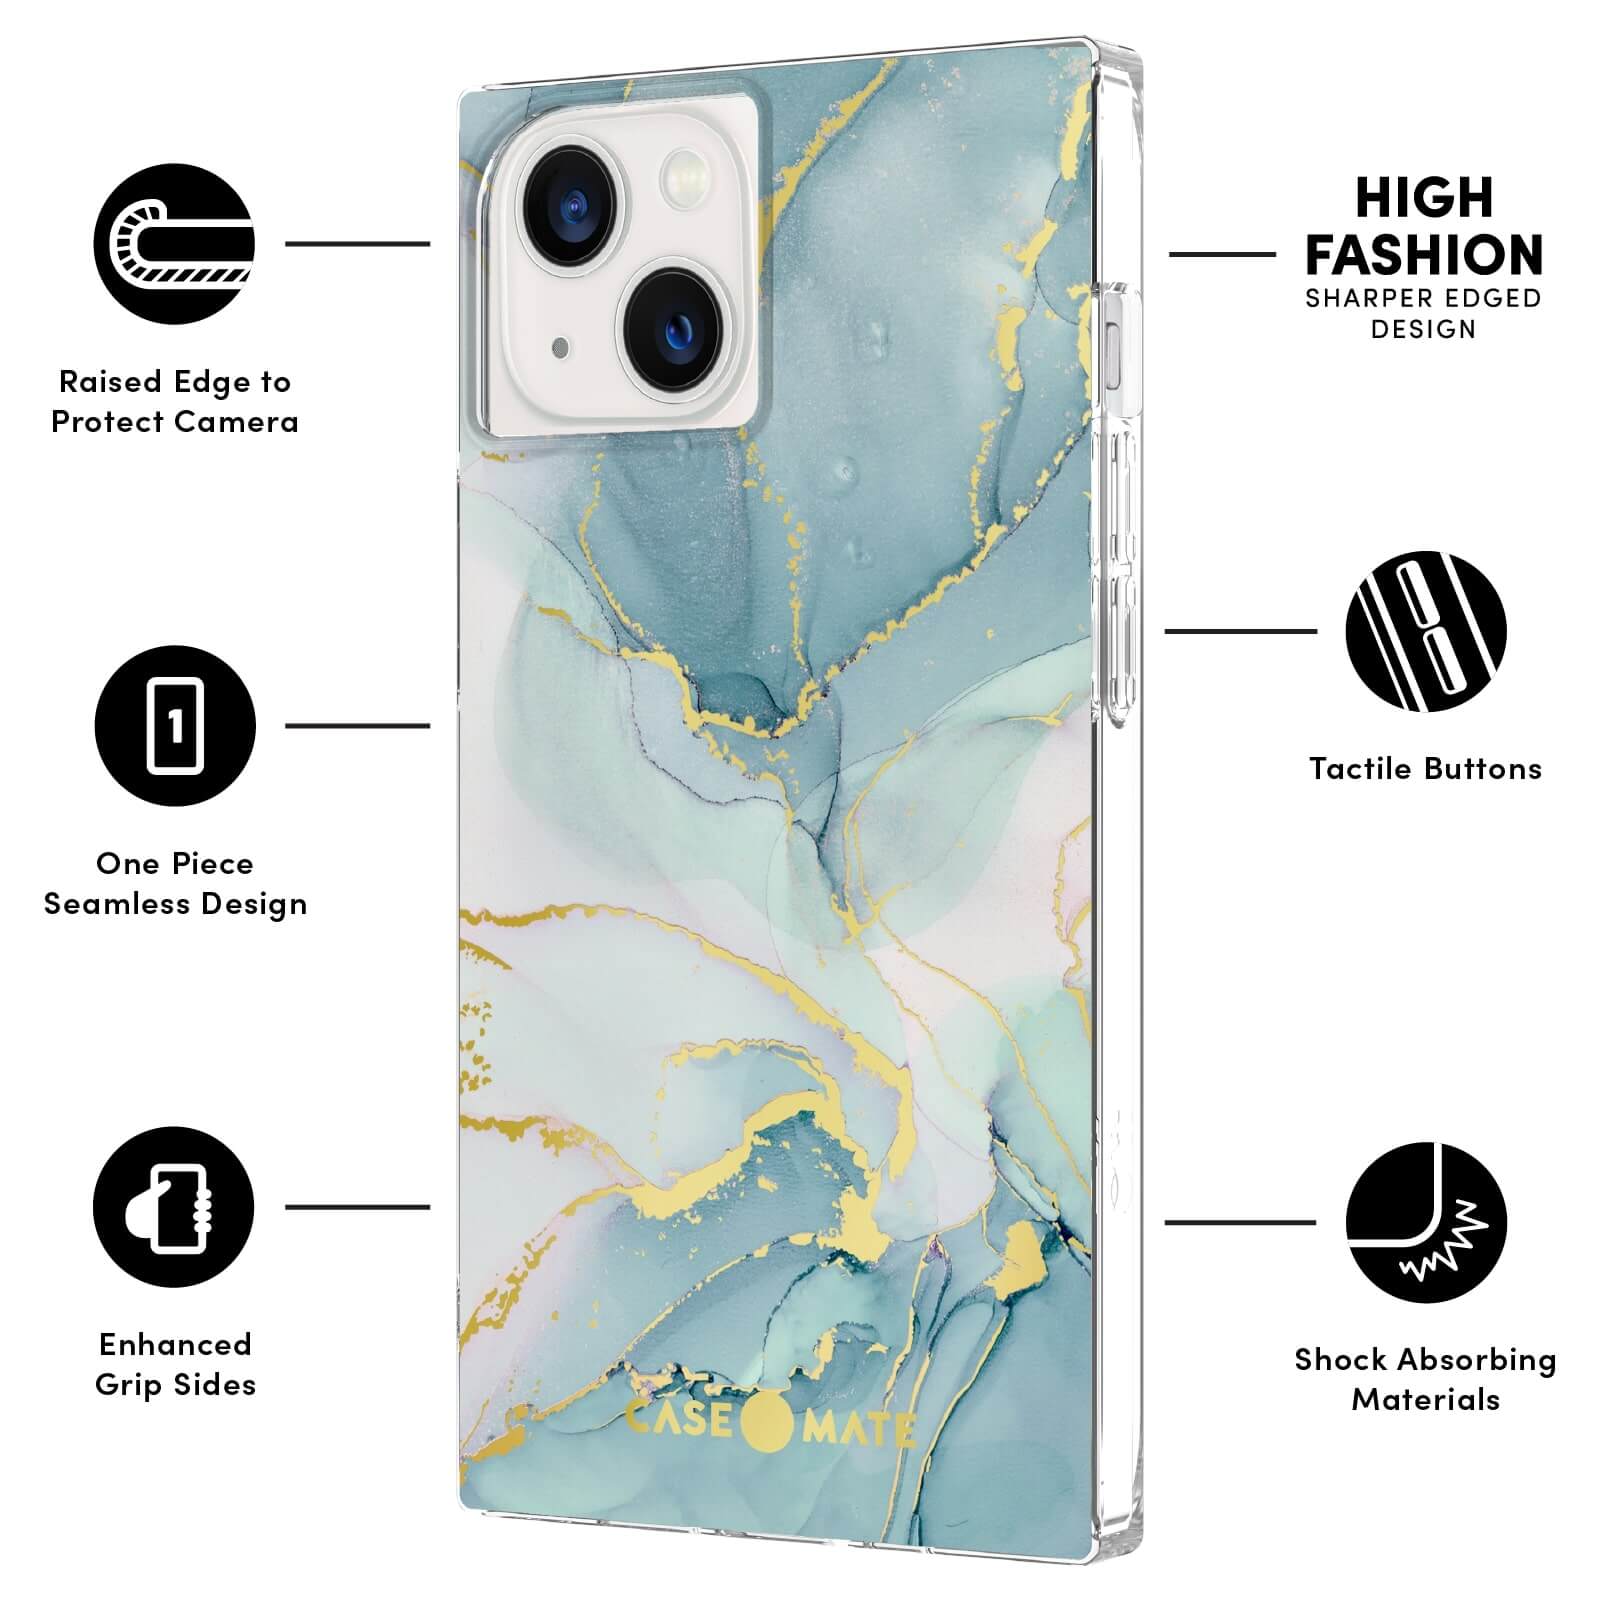 FEATURES: RAISED EDGE TO PROTECT CAMERA, ONE PIECE SEAMLESS DESIGN, ENHANCED GRIP SIDES, HIGH FASHION SHARPER EDGED DESIGN, TACTILE BUTTONS, SHOCK ABSORBING MATERIALS. COLOR::GLACIER MARBLE